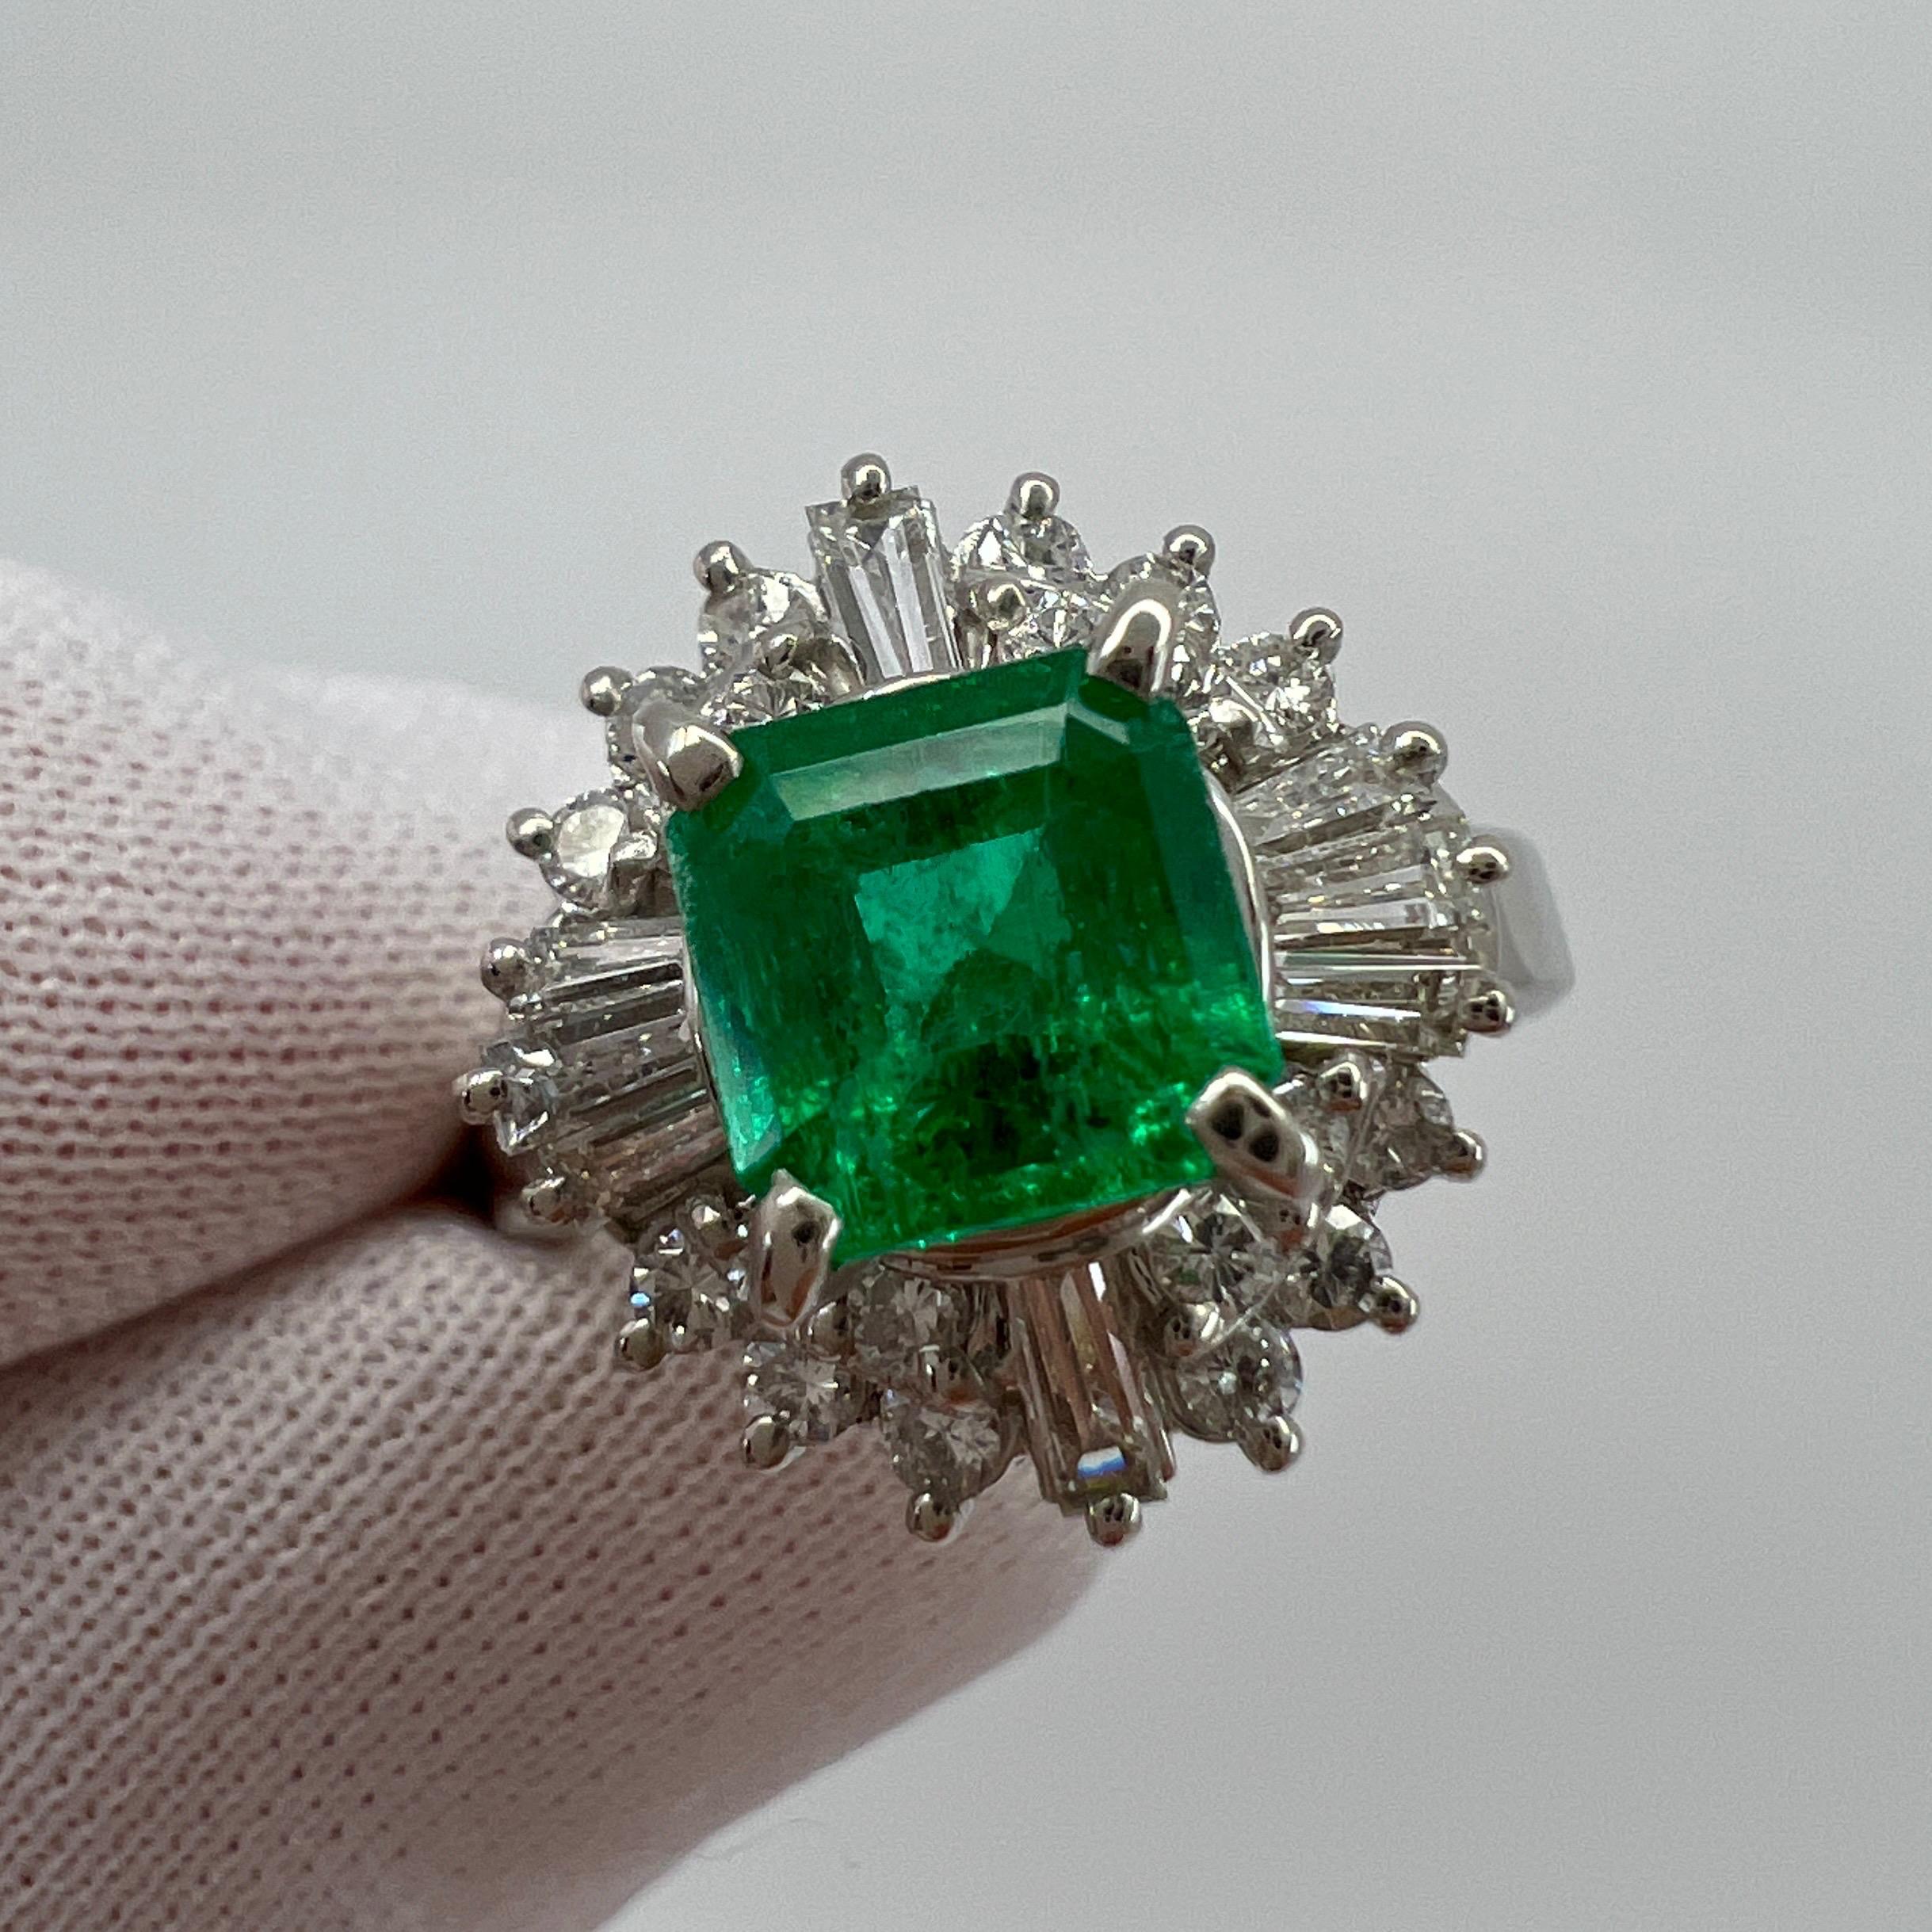 Fine Vivid Green Emerald & Diamond Platinum Halo Cocktail Ring.

1.90 Total carat weight. Stunning 1.19 carat Colombian emerald with a fine vivid green colour and an excellent emerald octagonal cut. The emerald has good clarity, a clean stone with